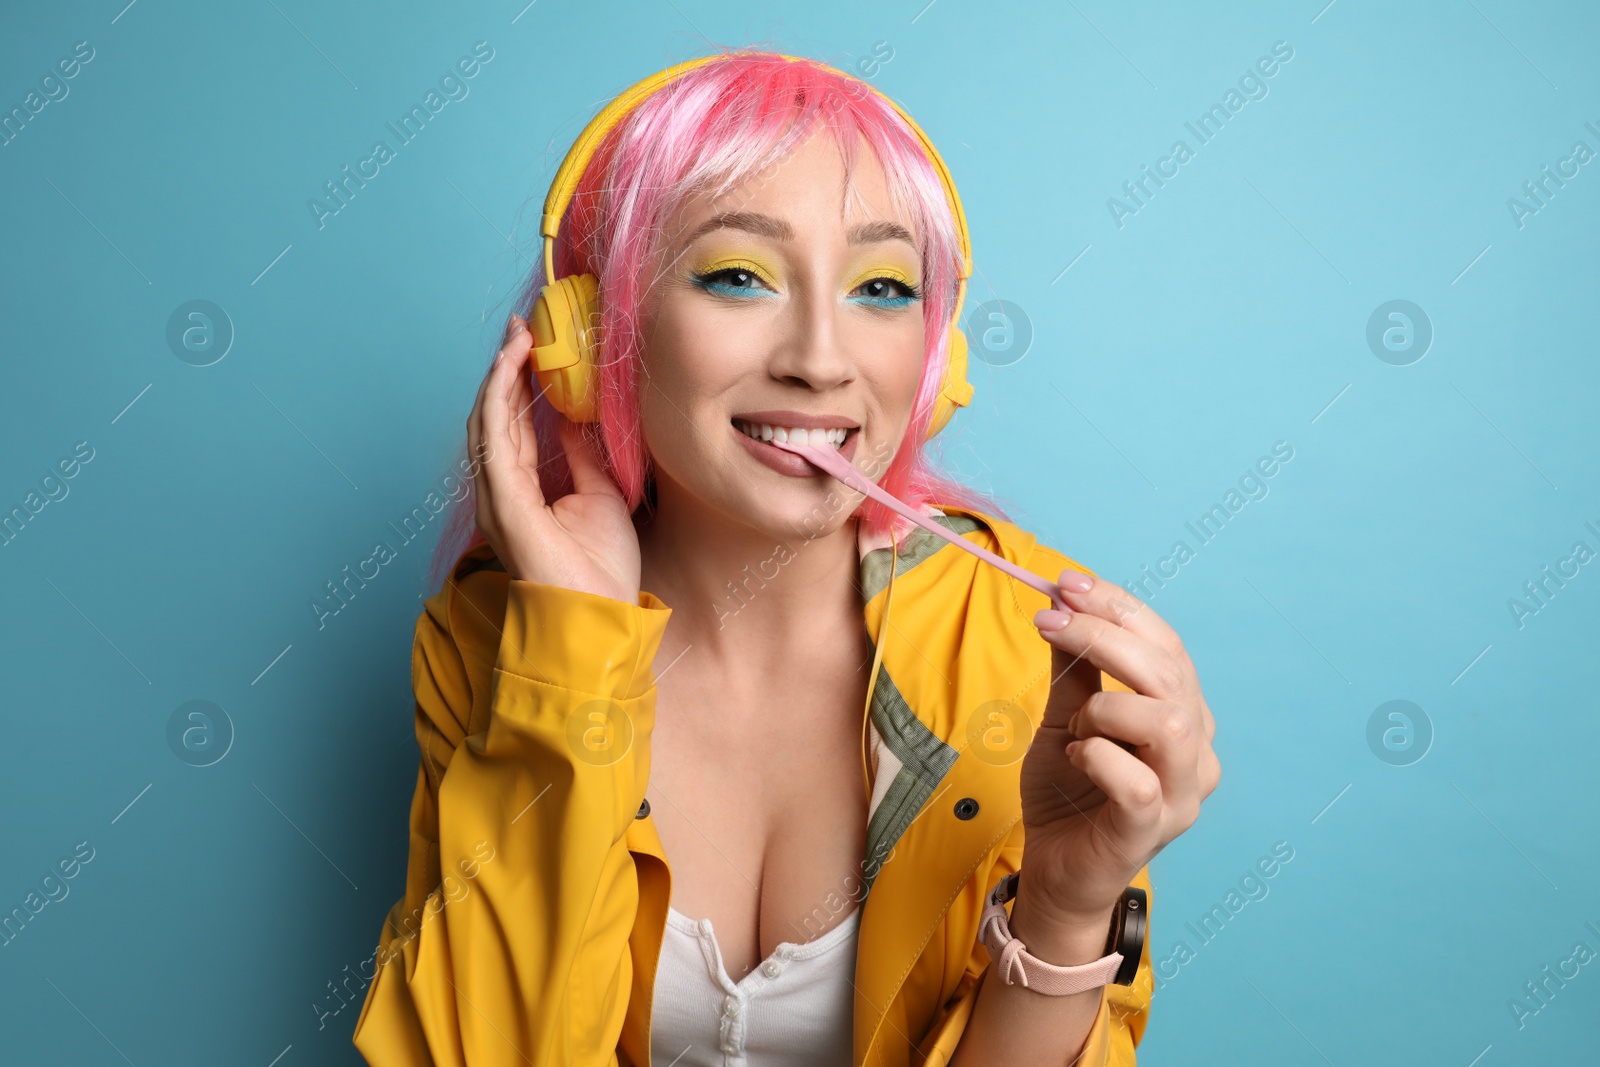 Photo of Fashionable young woman in pink wig with headphones chewing bubblegum on yellow background